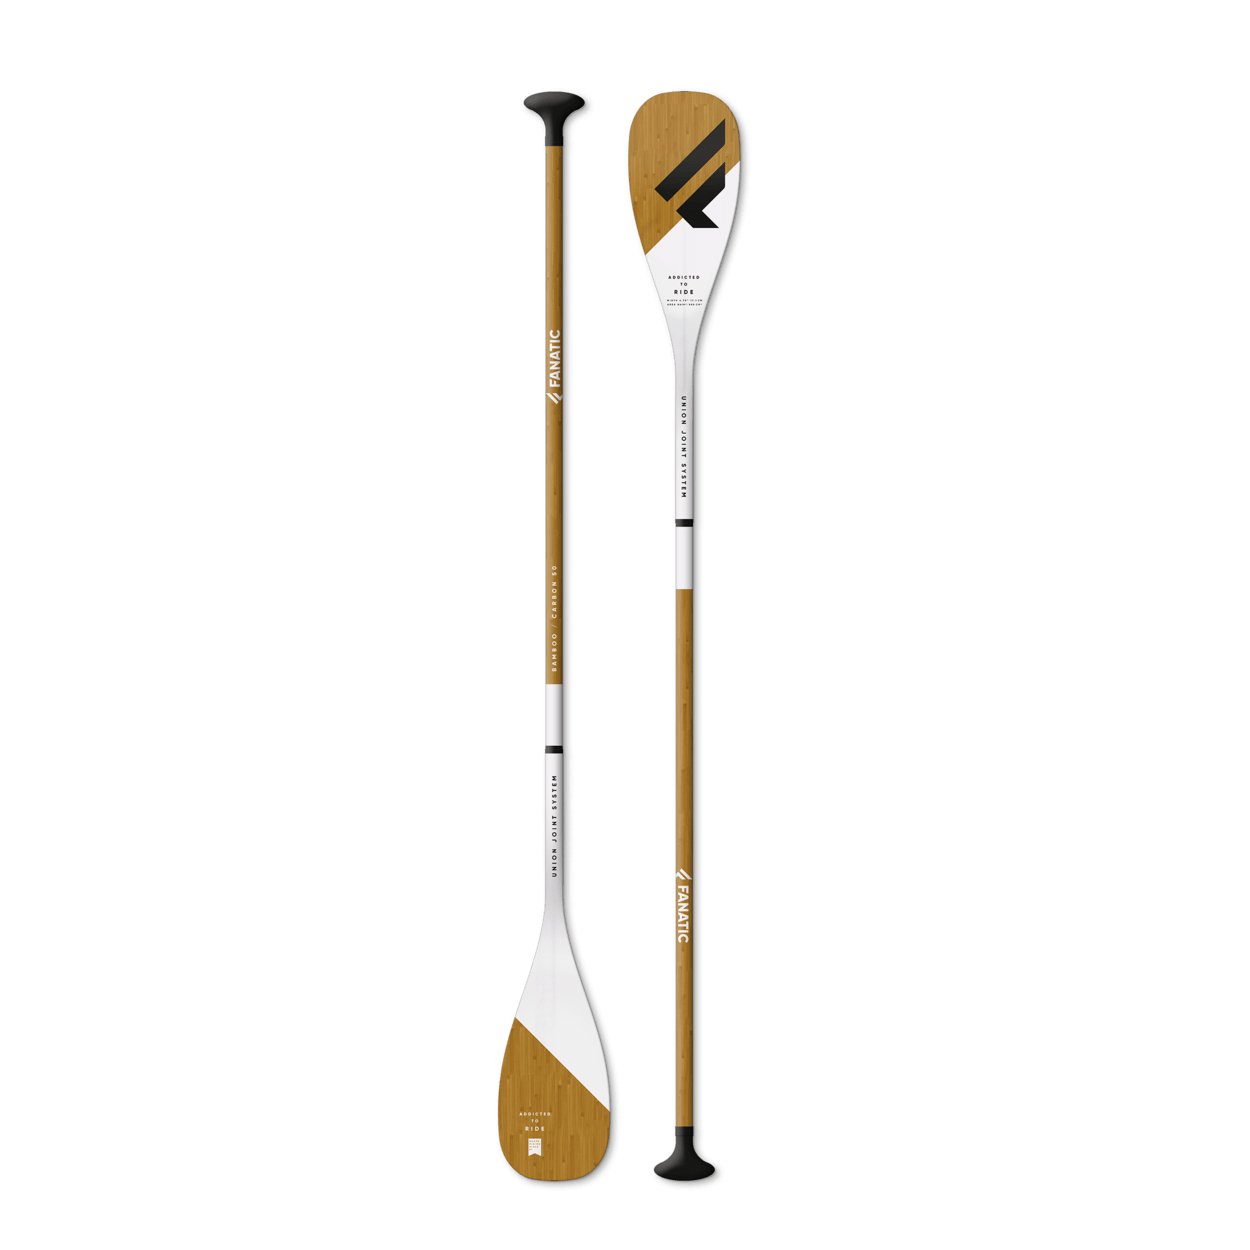 Fanatic Bamboo Carbon 50 2022 - Worthing Watersports - 9008415923236 - Paddles - Fanatic SUP